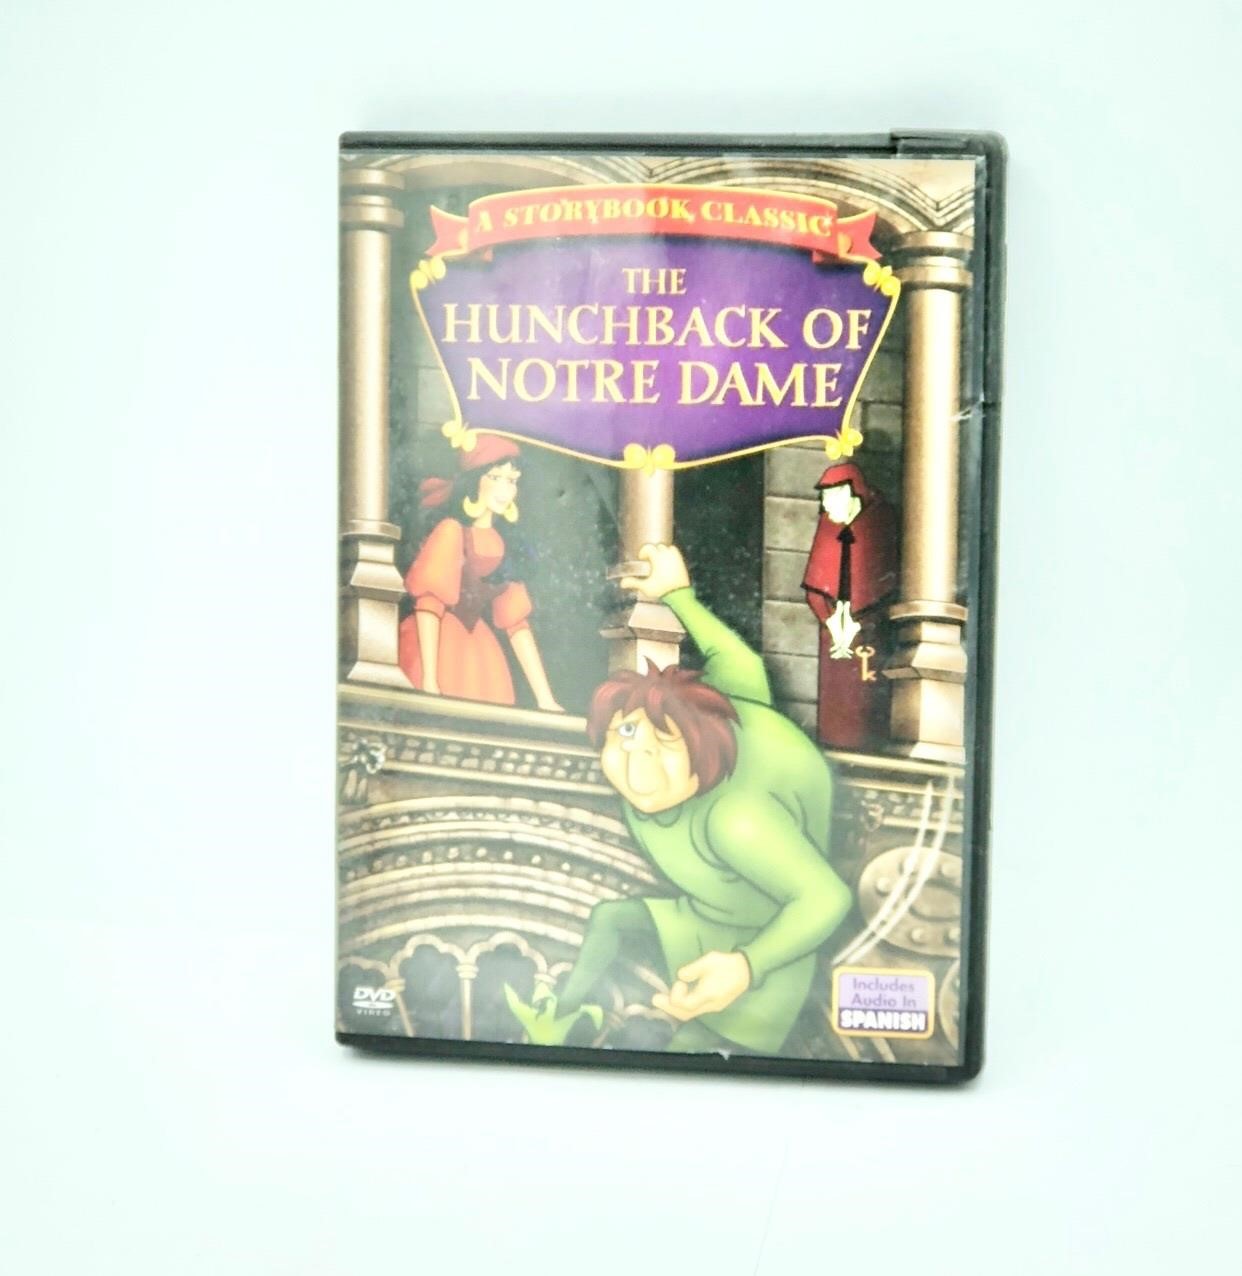 The Hunchback of Notre Dame DVD previously viewed